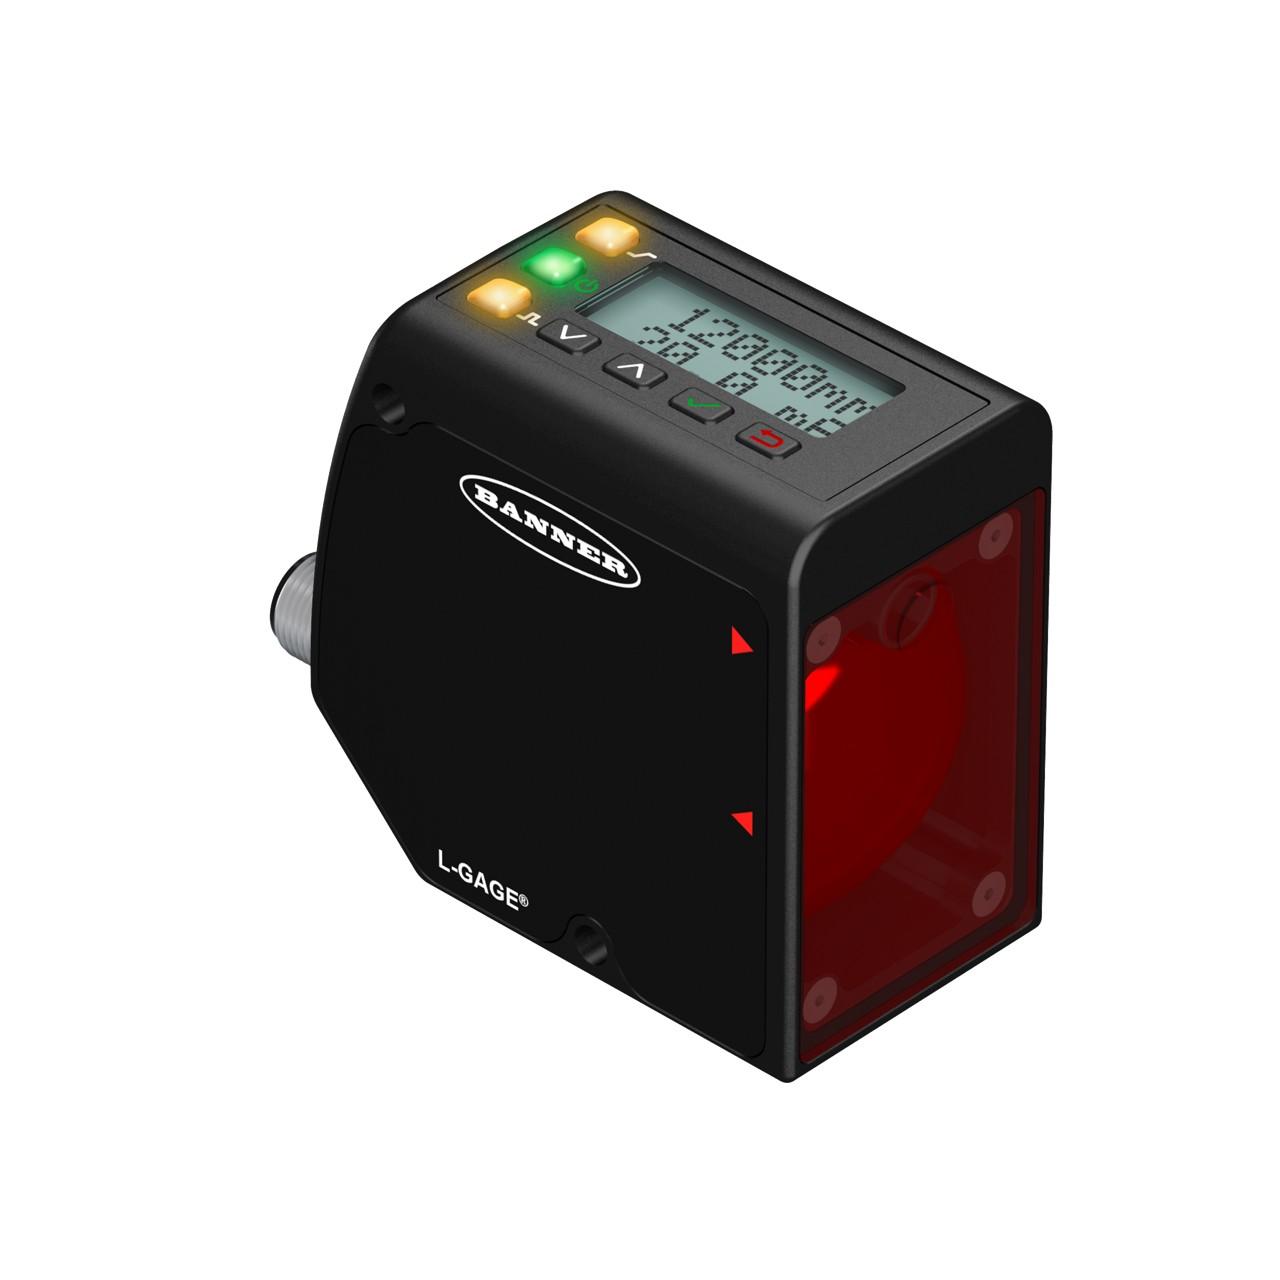 Banner LTF24KC2LDQ Class 2 Laser photo-electric distance sensor with diffuse time-of-flight system - Banner Engineering (L-GAGE series - LTF) - Part #803280 - Sensing range 5cm...24m - Visible class 2 red Laser light (660nm) - 2 x digital outputs (PNP/NPN transistors) - Sup